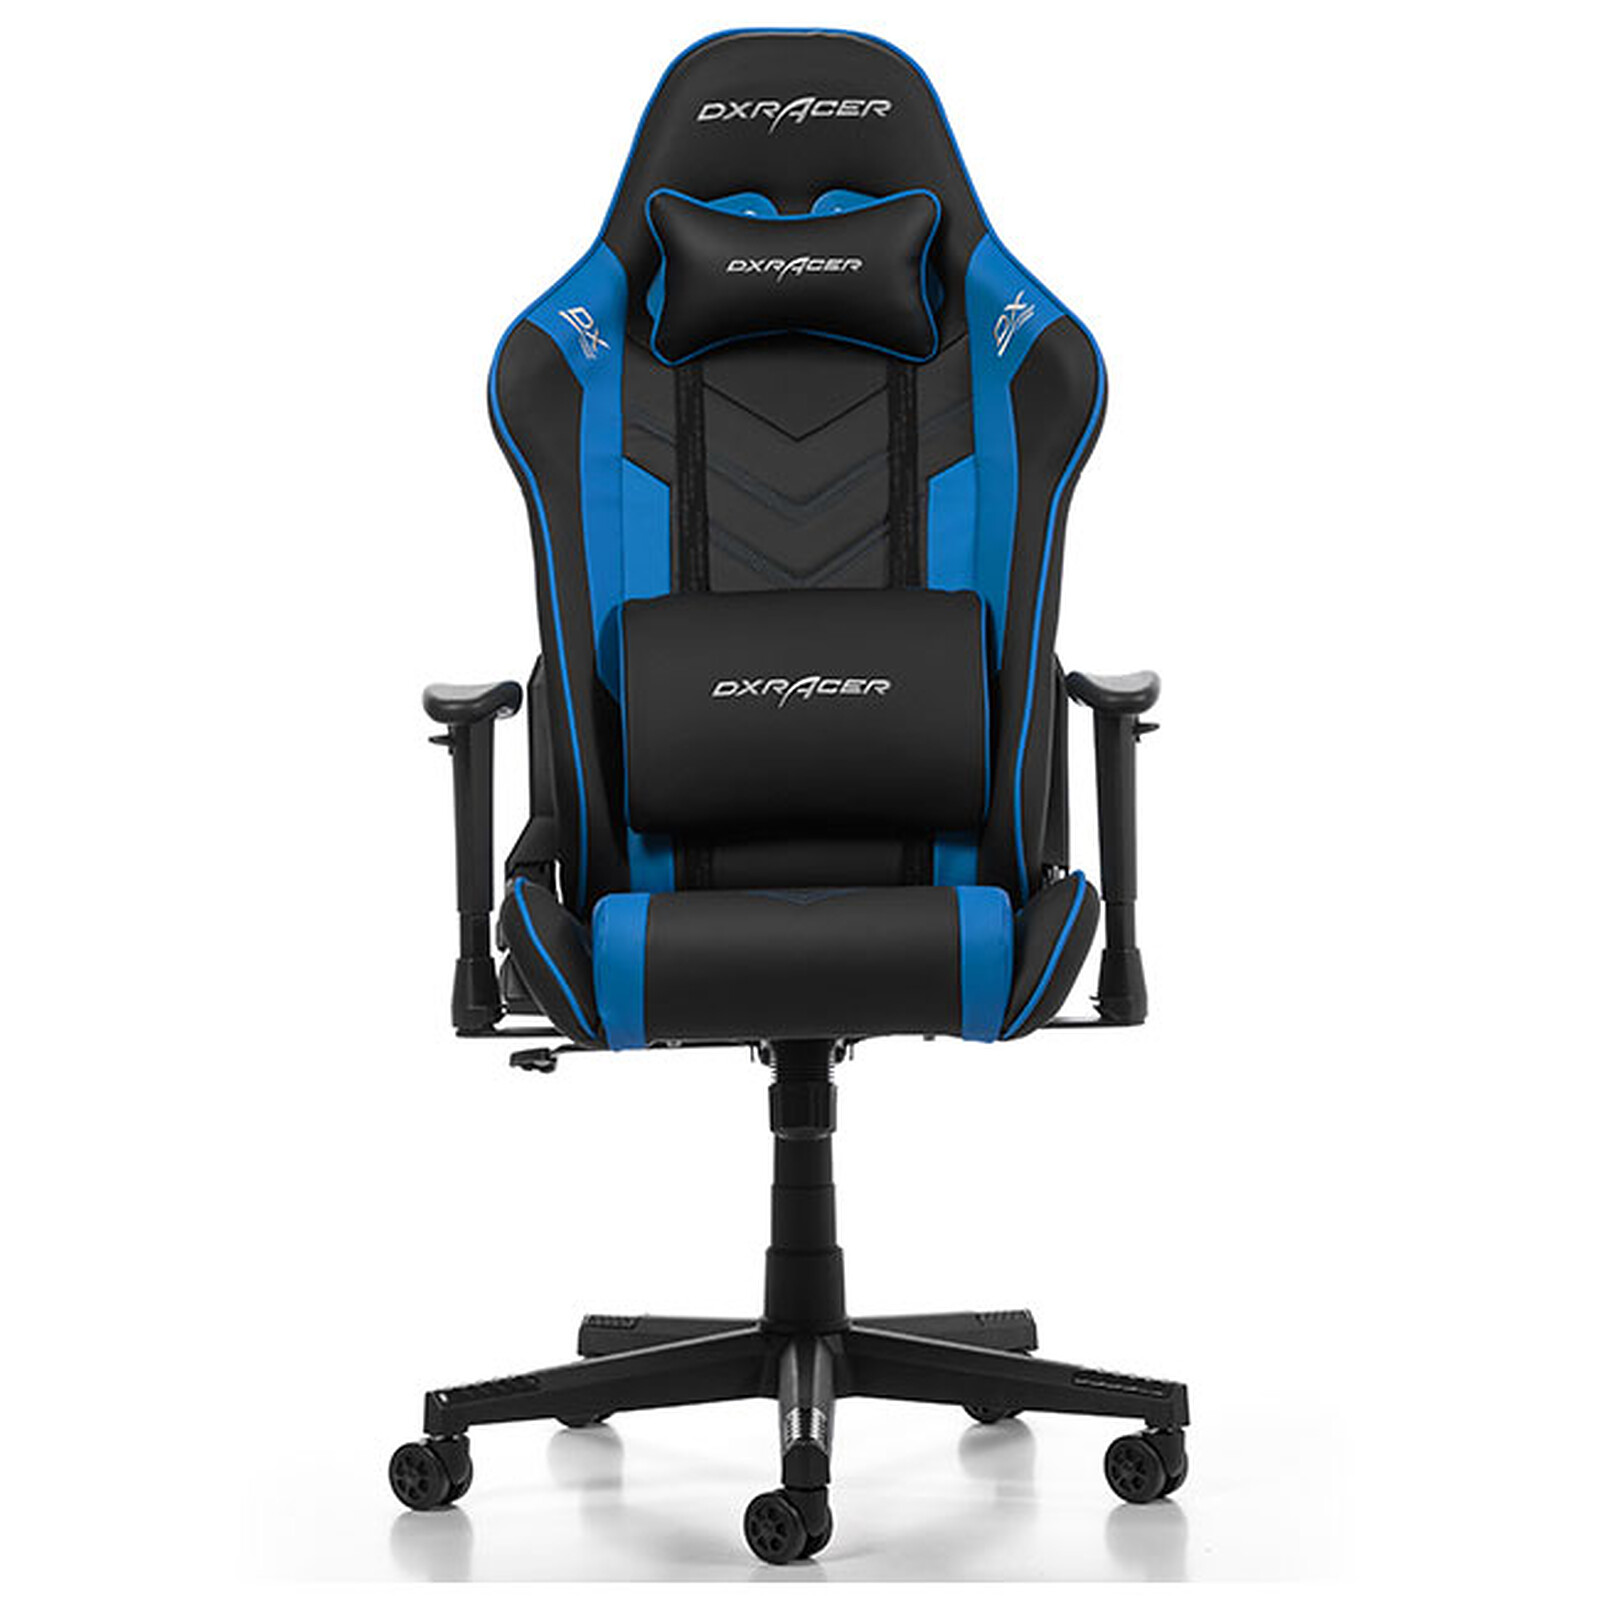 DXRacer Prince P132 (blue) - Gaming chair - LDLC | Holy Moley